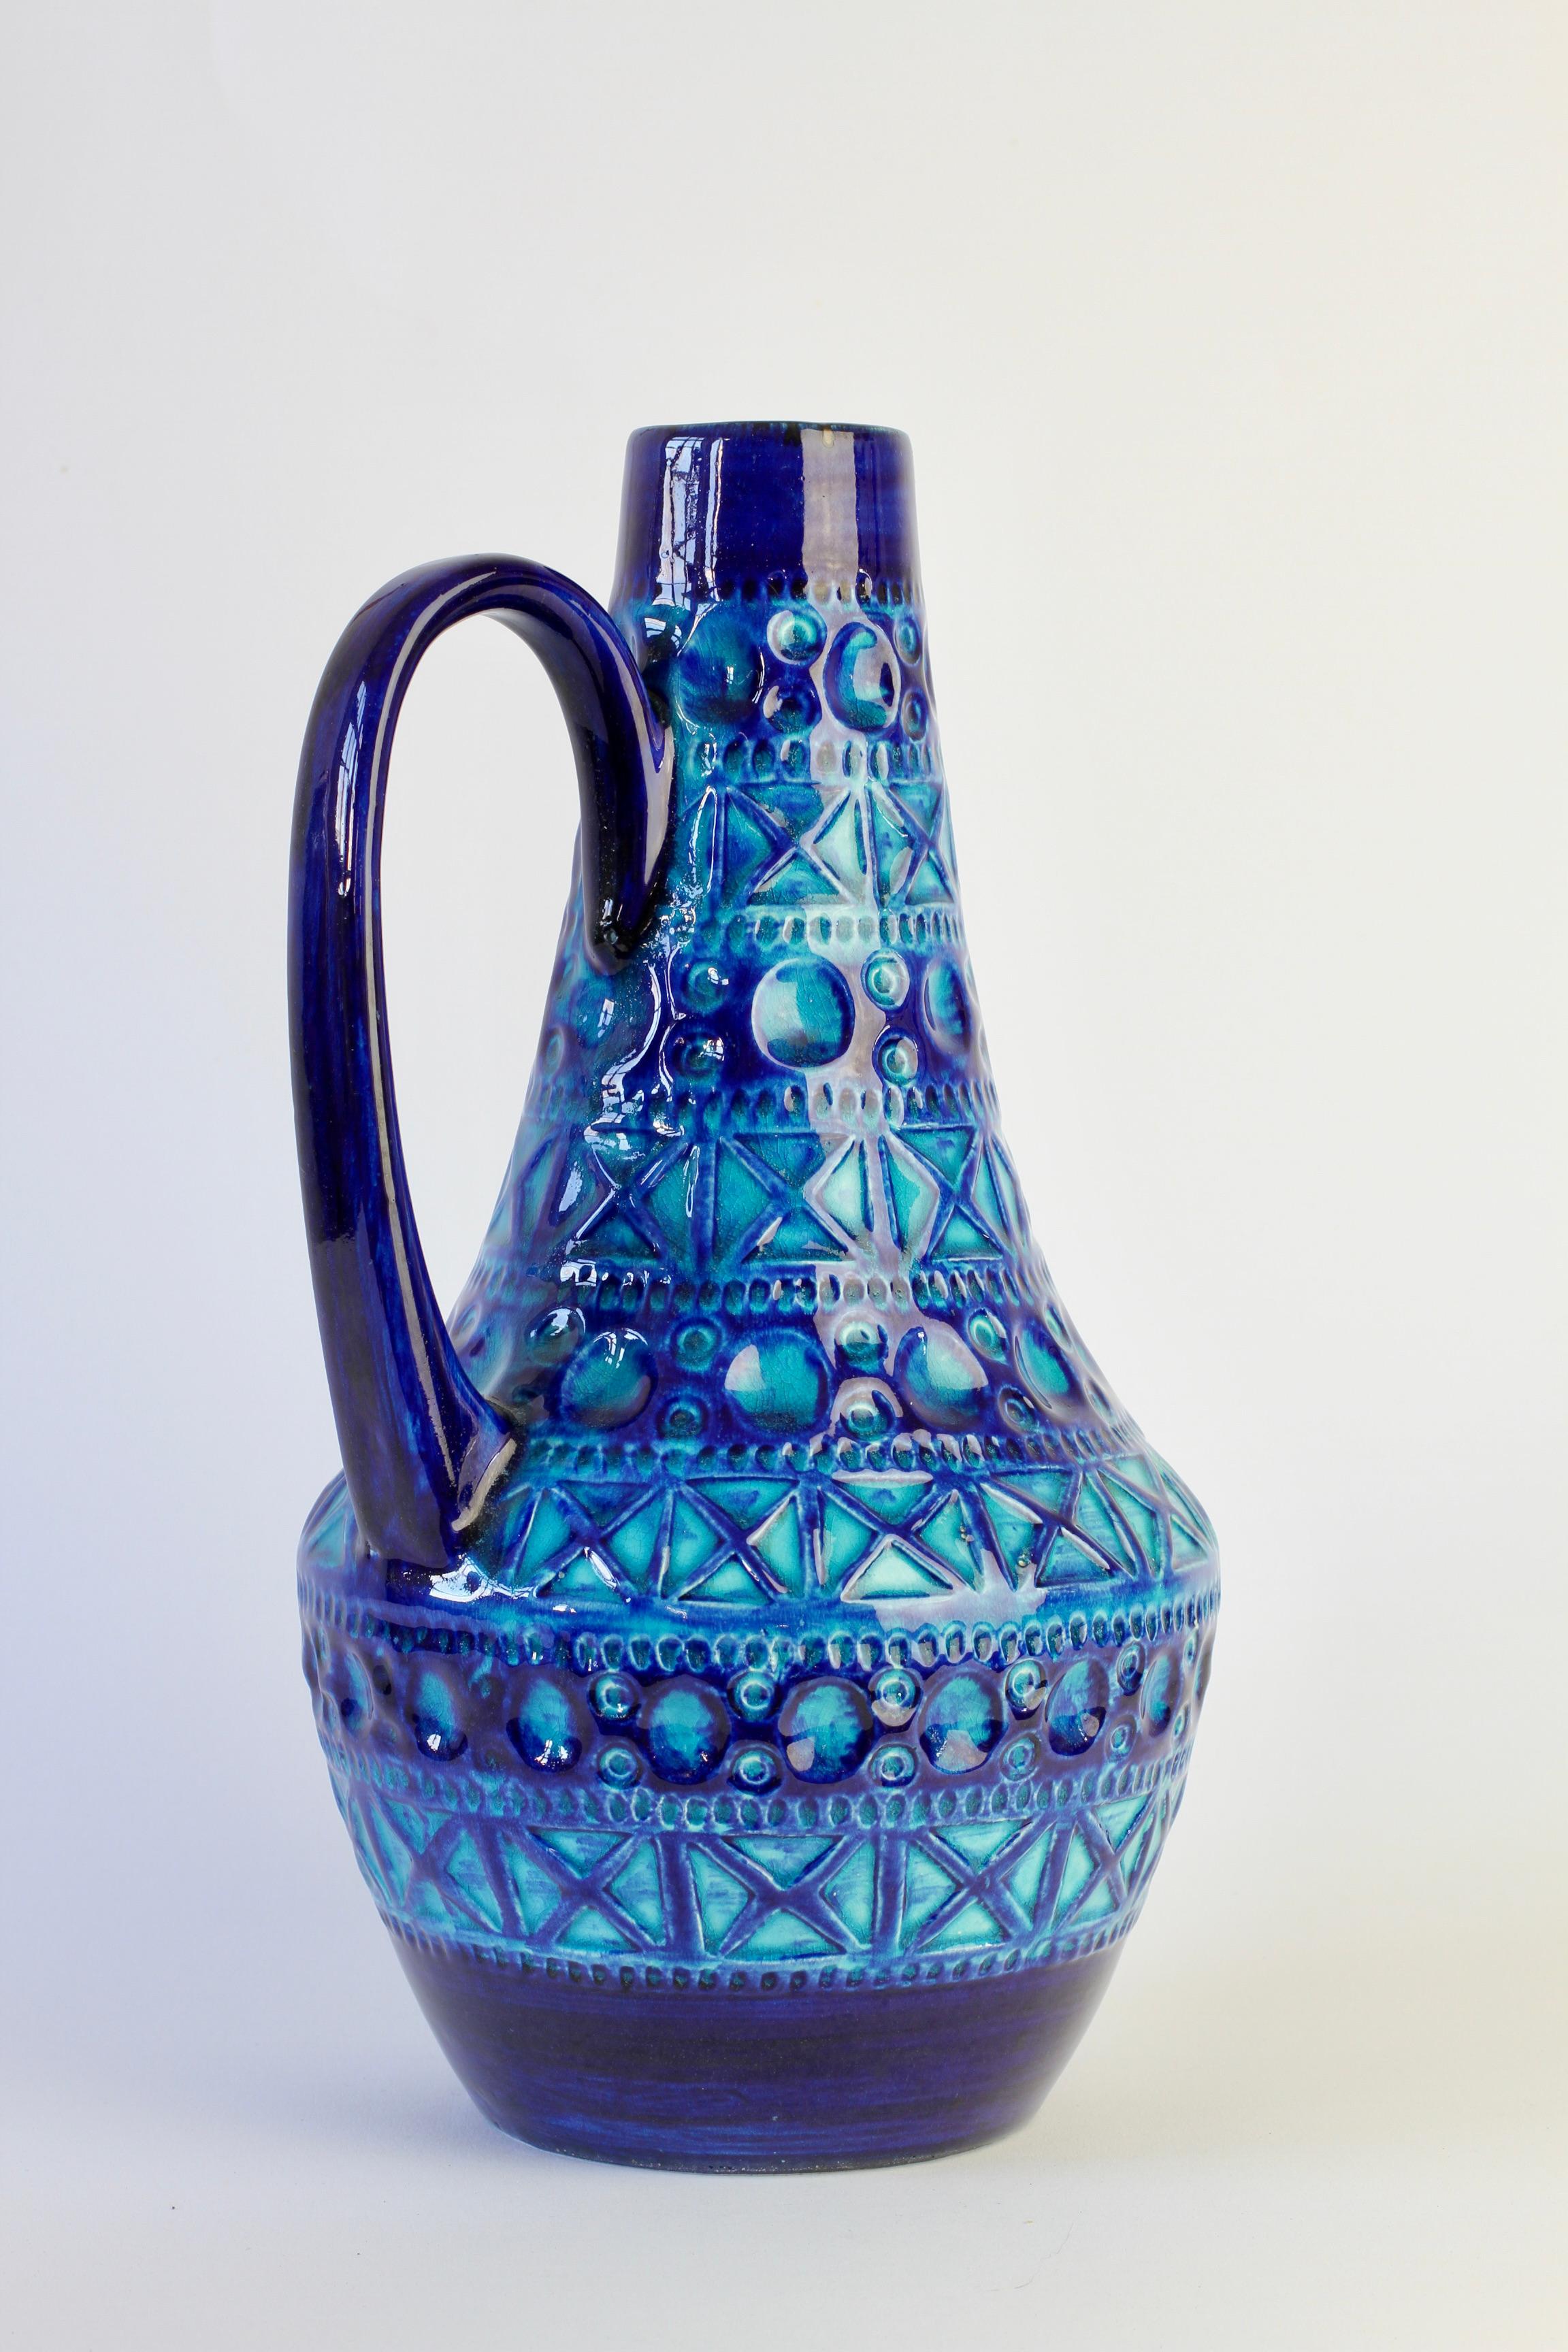 Fired Vintage West German Bitossi Style Vase by Bodo Mans for Bay Pottery, circa 1970 For Sale